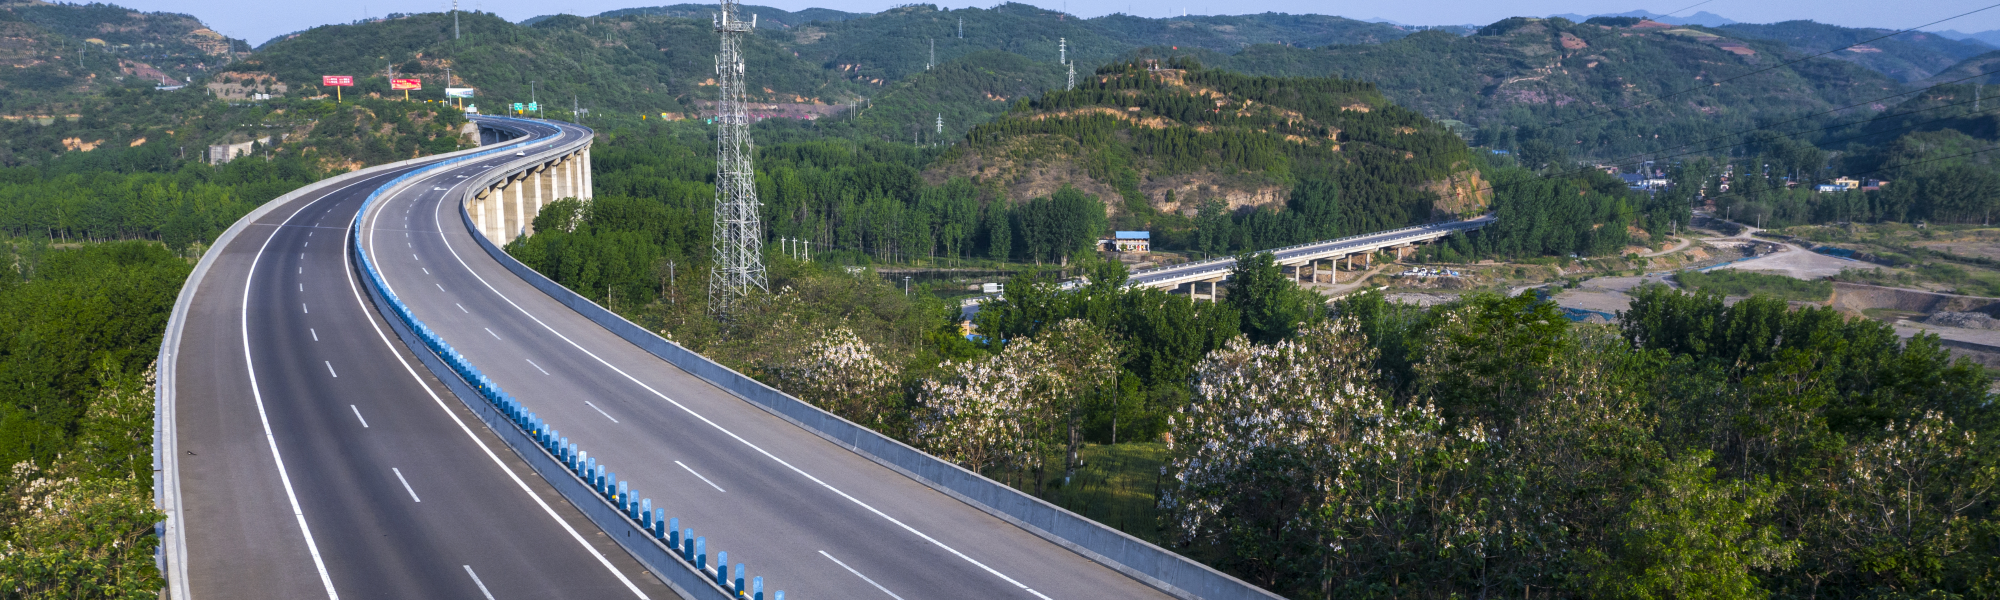 With the rapid expansion of TIR in China, inland Zhengzhou and coastal Qingdao have emerged as pioneers for international road transport connectivity. With TIR, both cities are boosting their key roles in regional trade networks.